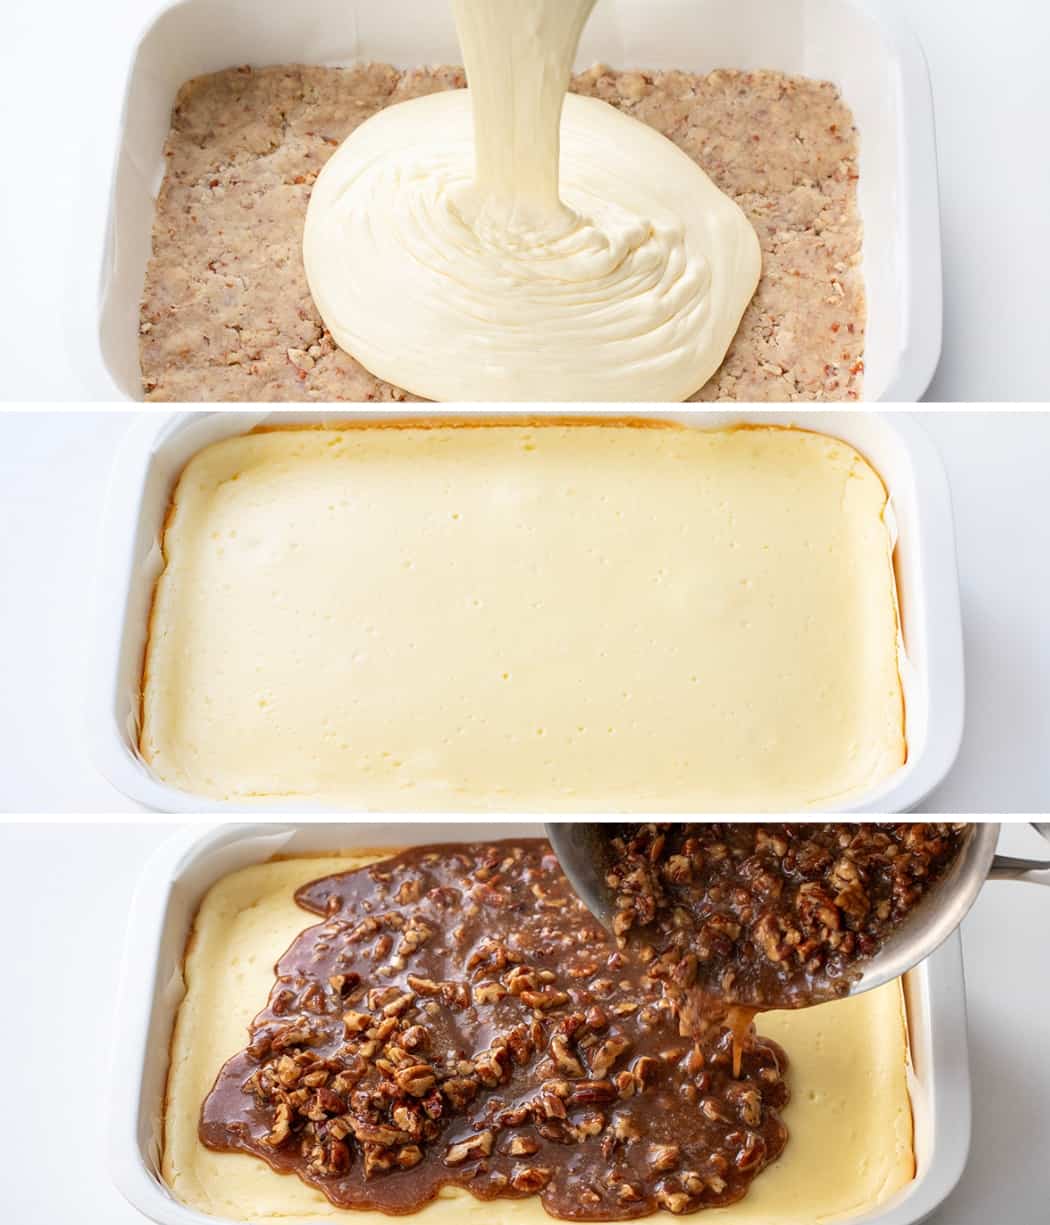 Steps for filling, baking, and then topping cheesecake bars with pecan sauce to make Pecan Pie Cheesecake Bars.